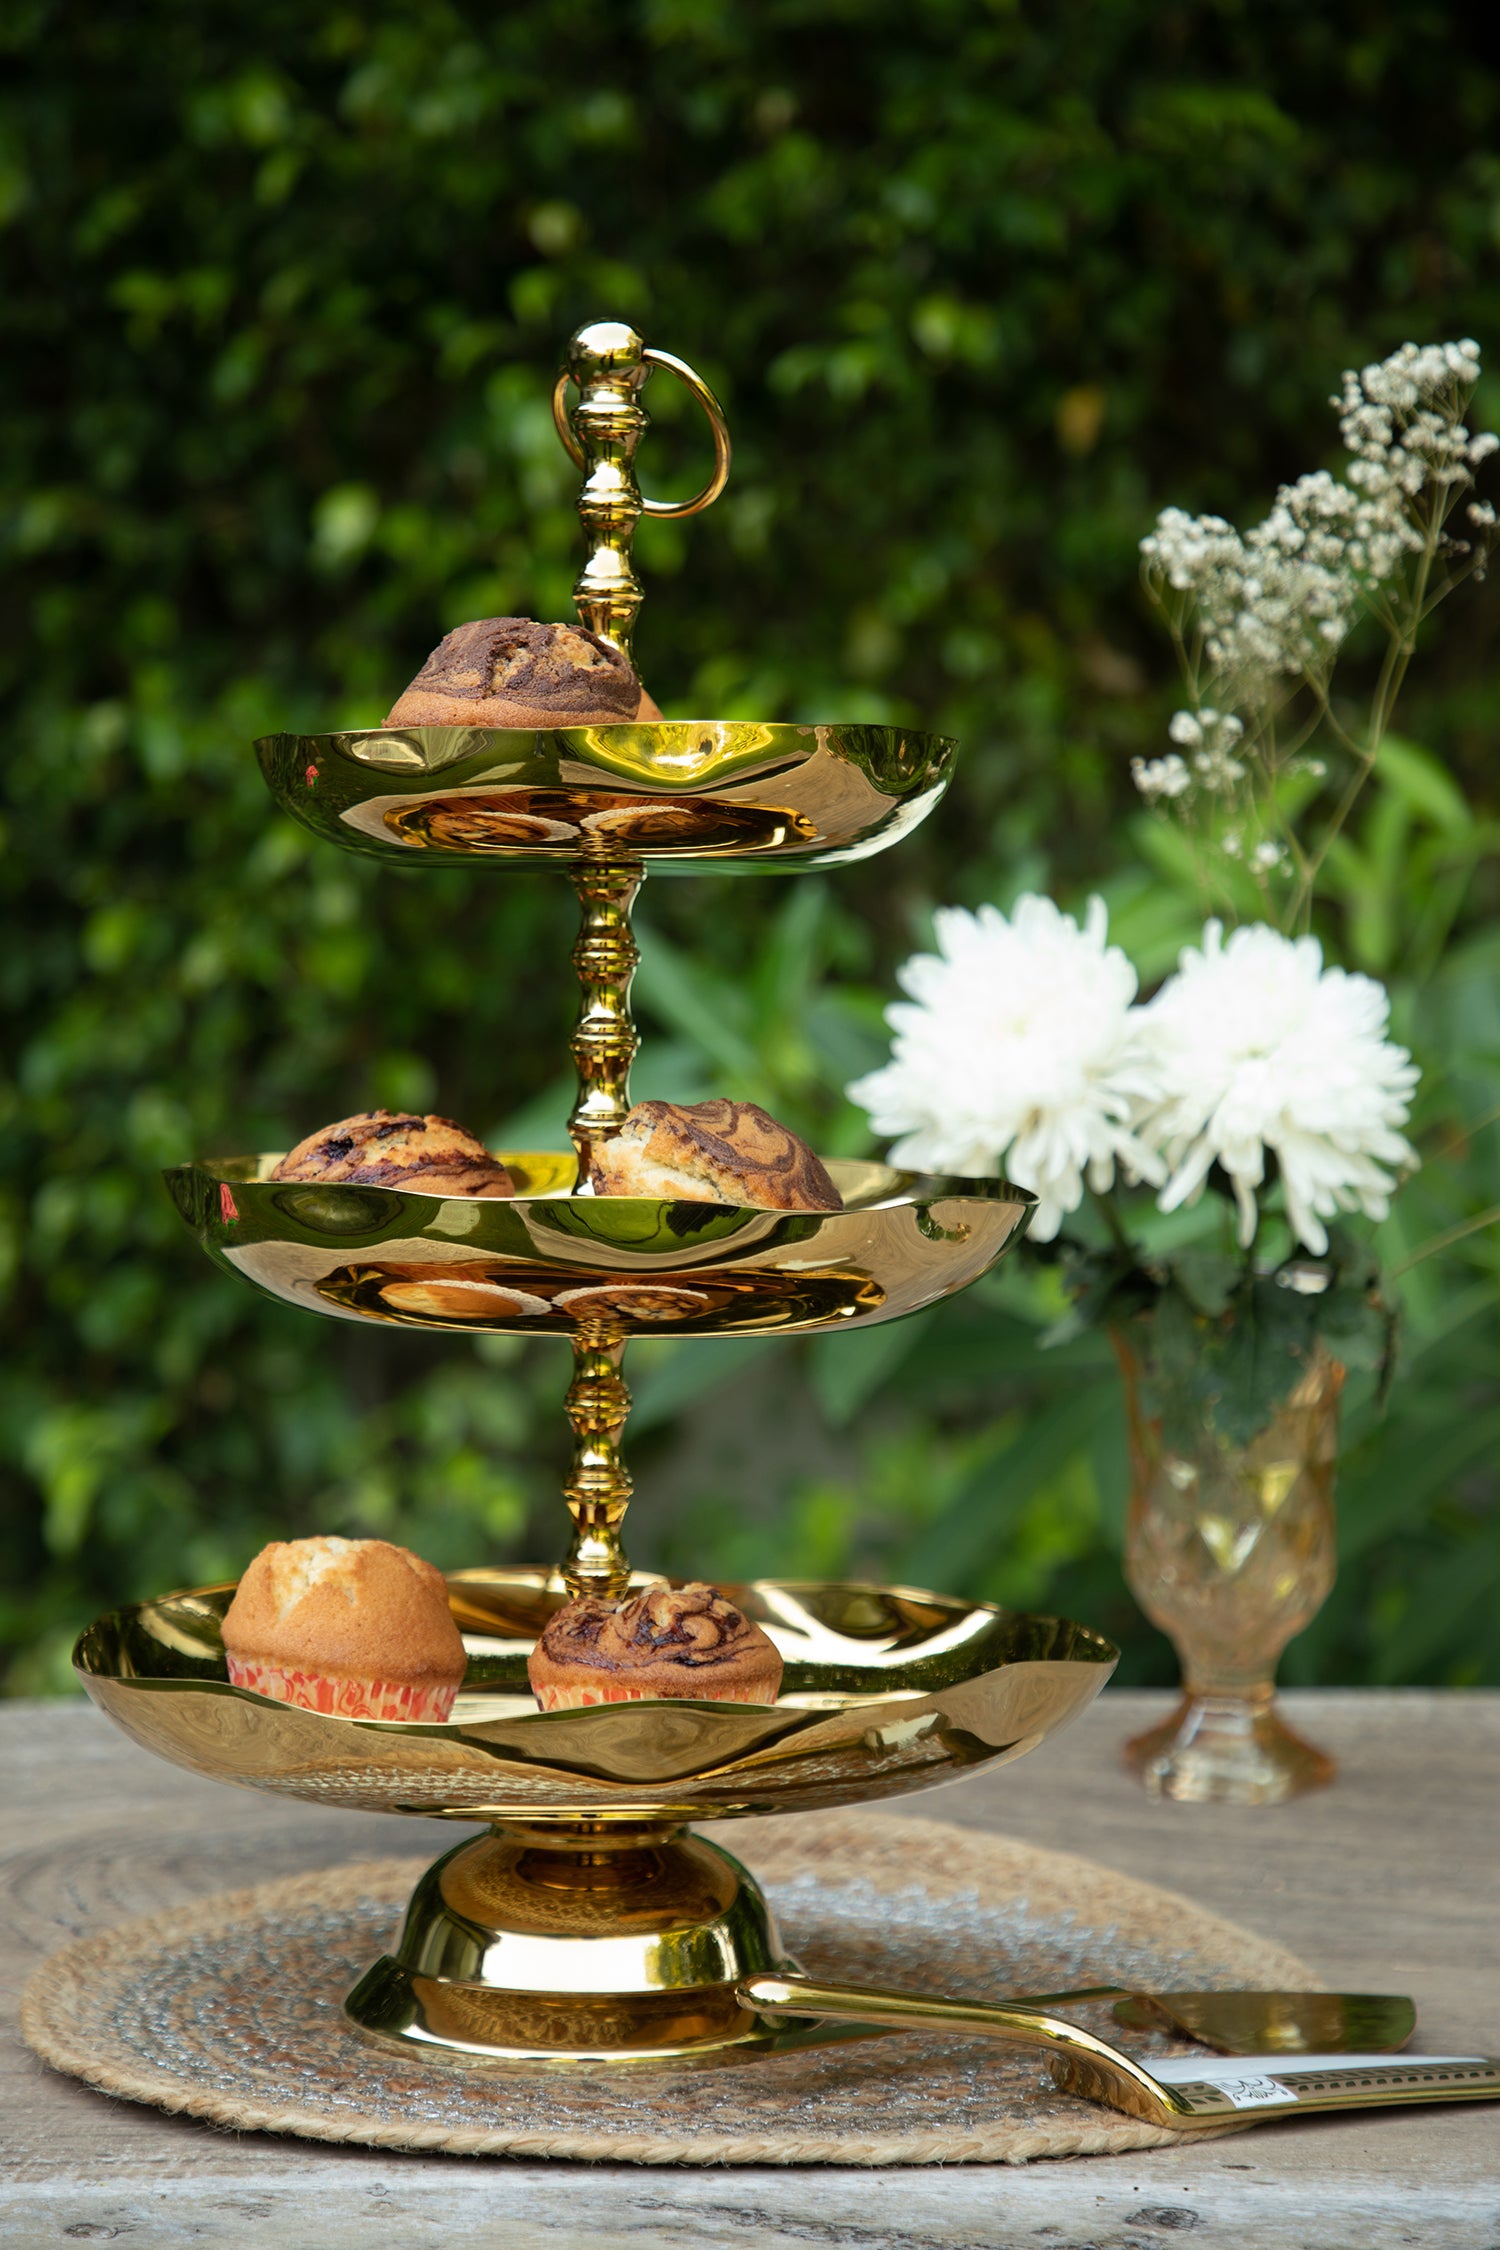 You are mostly welcome' cake stand – KETNA PATEL ART STUDIO